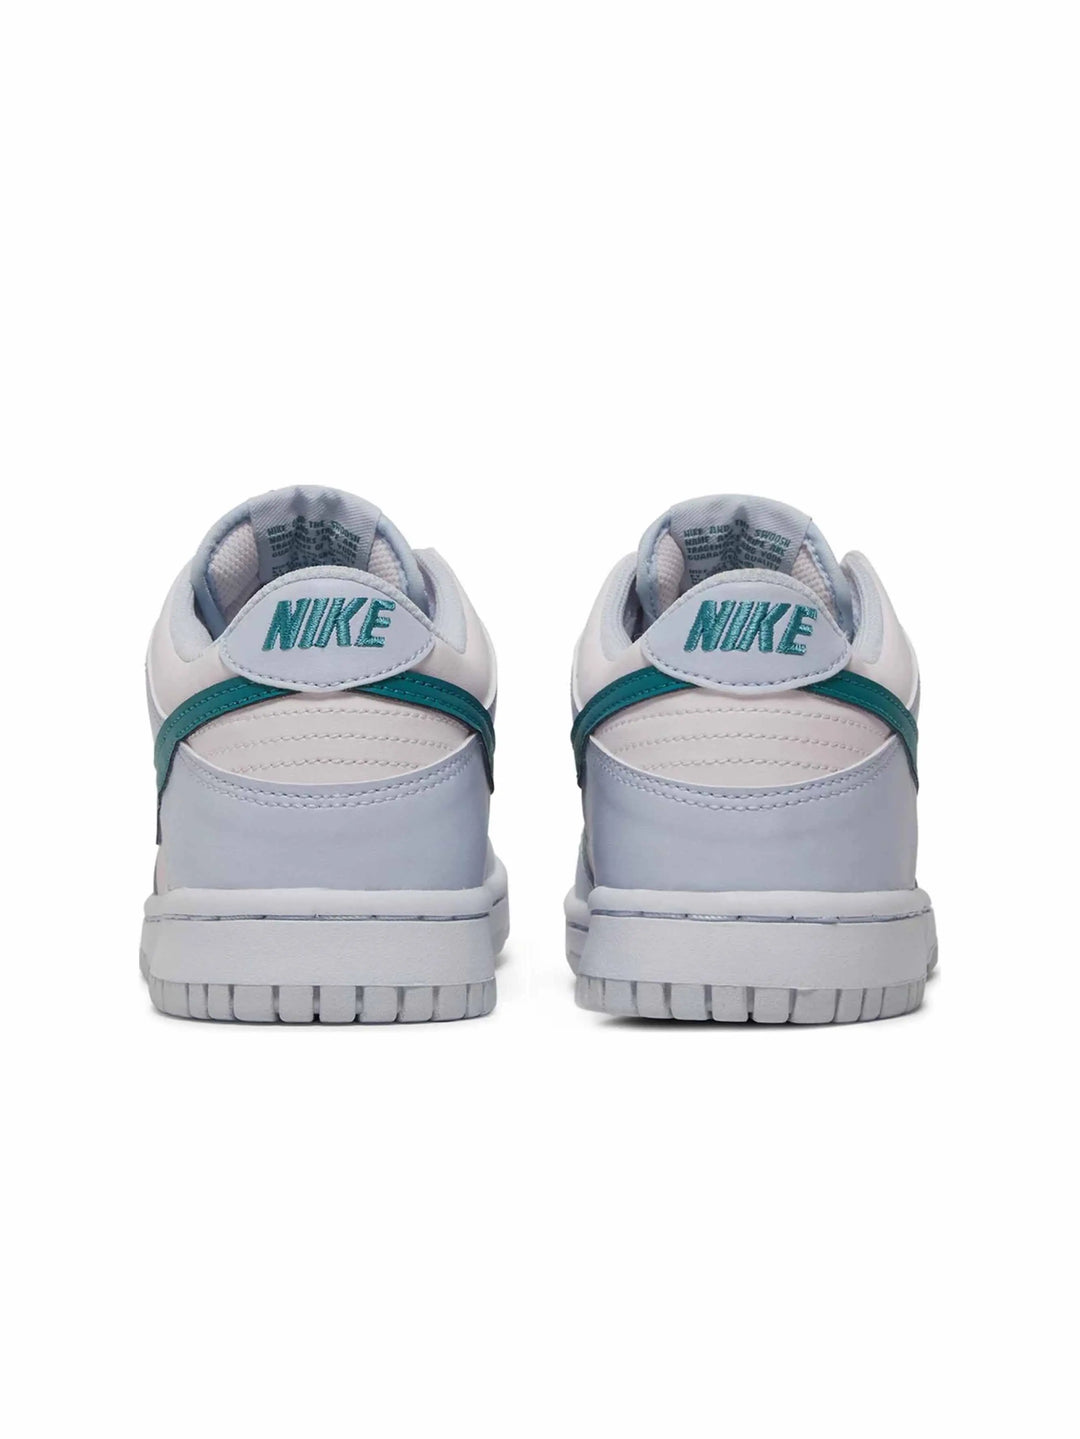 Nike Dunk Low Mineral Teal (GS) - Prior